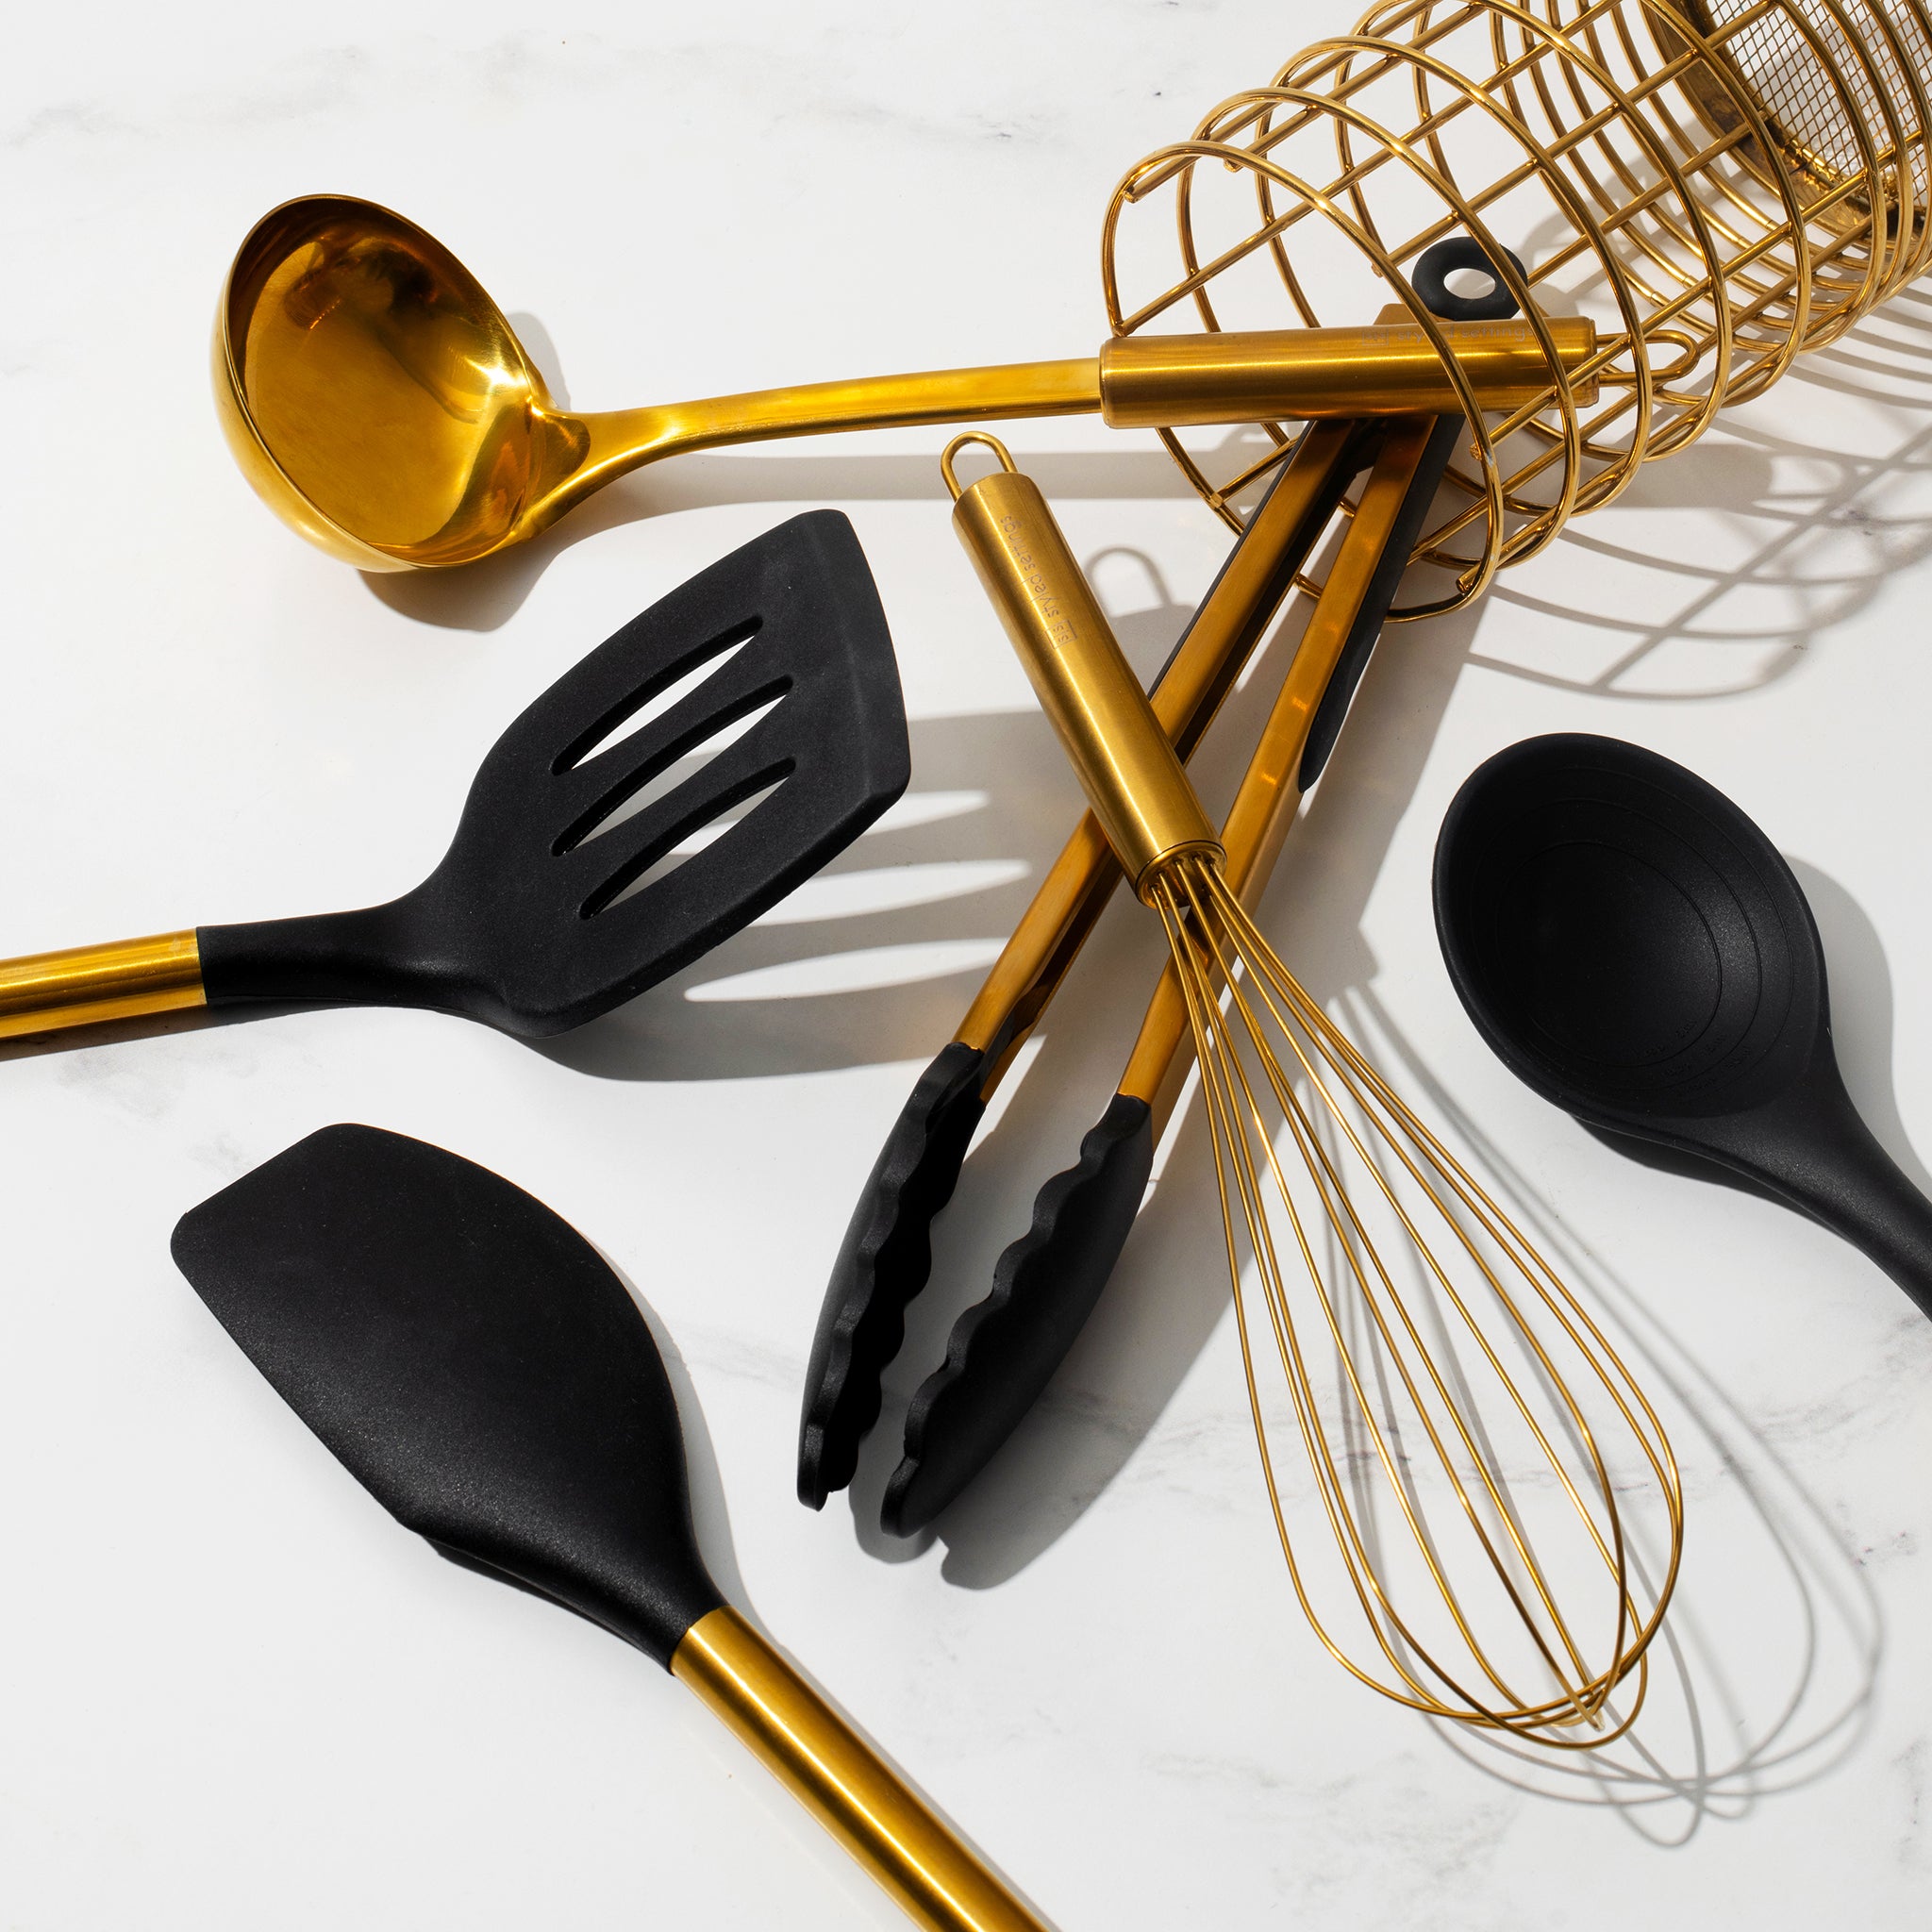 Styled Settings White & Gold Nylon Cooking Utensils with Holder